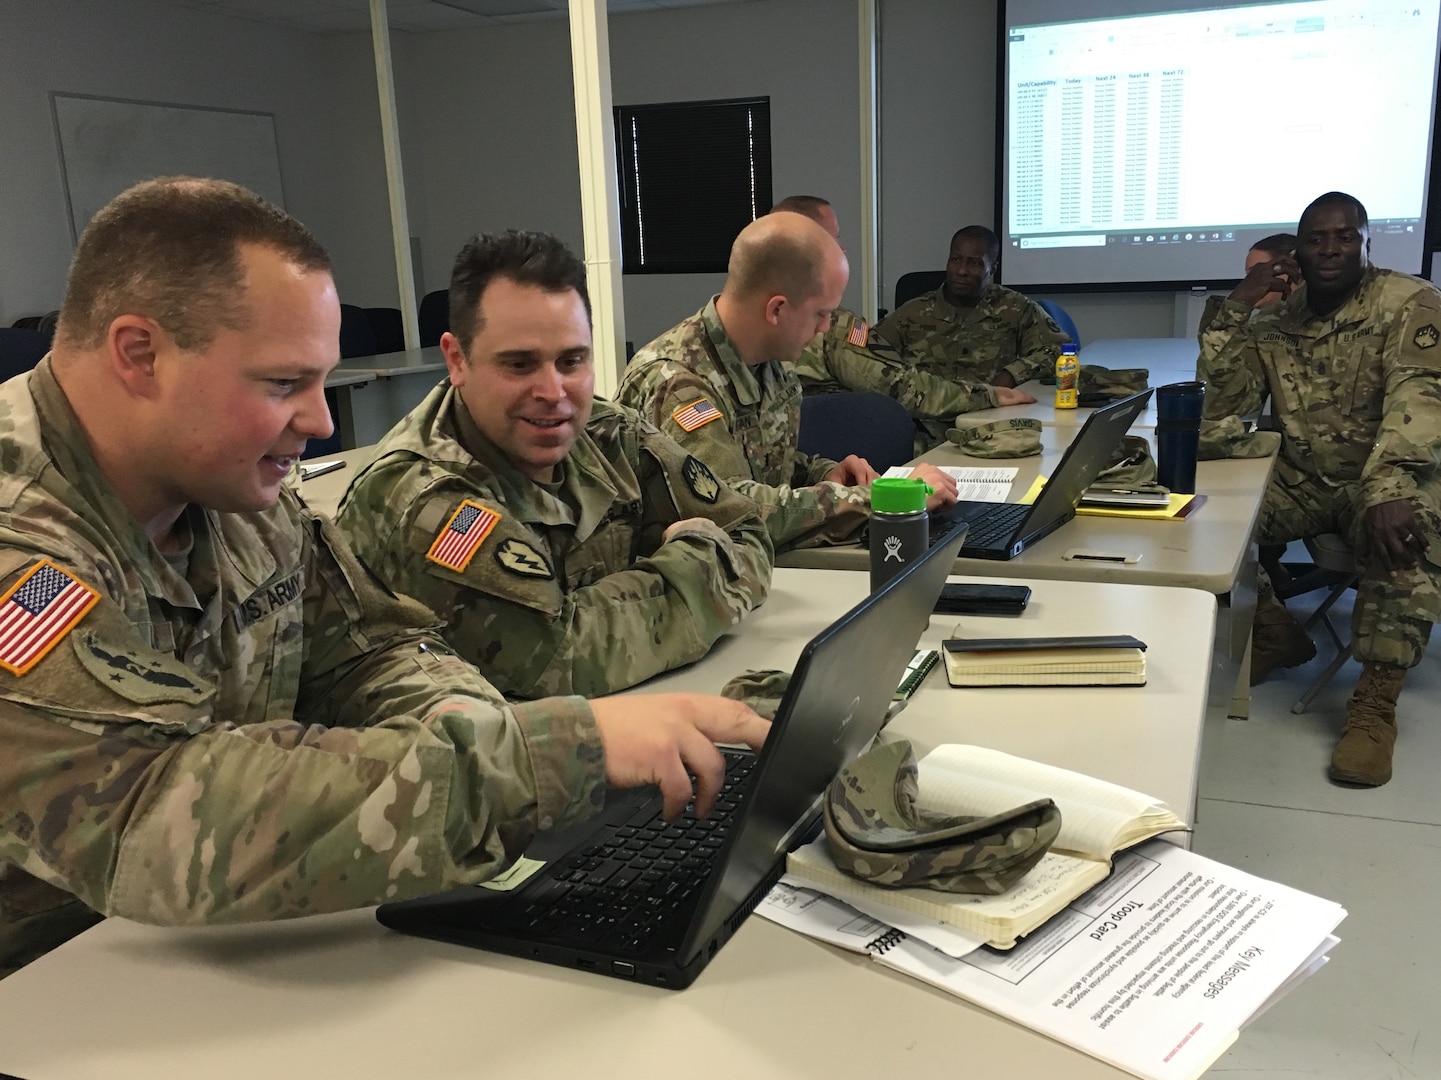 Members of the 110th Chemical Battalion that comprises Task Force 110 met during a small-group break-out for DoD Defense CBRN Response Force (DCRF) training at Fort Hood, Texas, Nov. 29, 2018. The 110th is based at Joint-Base Lewis-McCord, Wash. A JTF-CS Mobile Training Team (MTT) covered a variety of topics in logistics, legal, medical, personnel movement, collaborative tools, media engagement and the 2-year plan for the DCRF. (DoD photo by Air Force Lt. Col. Karen Roganov, director of JTF-CS Public Affairs/ released)